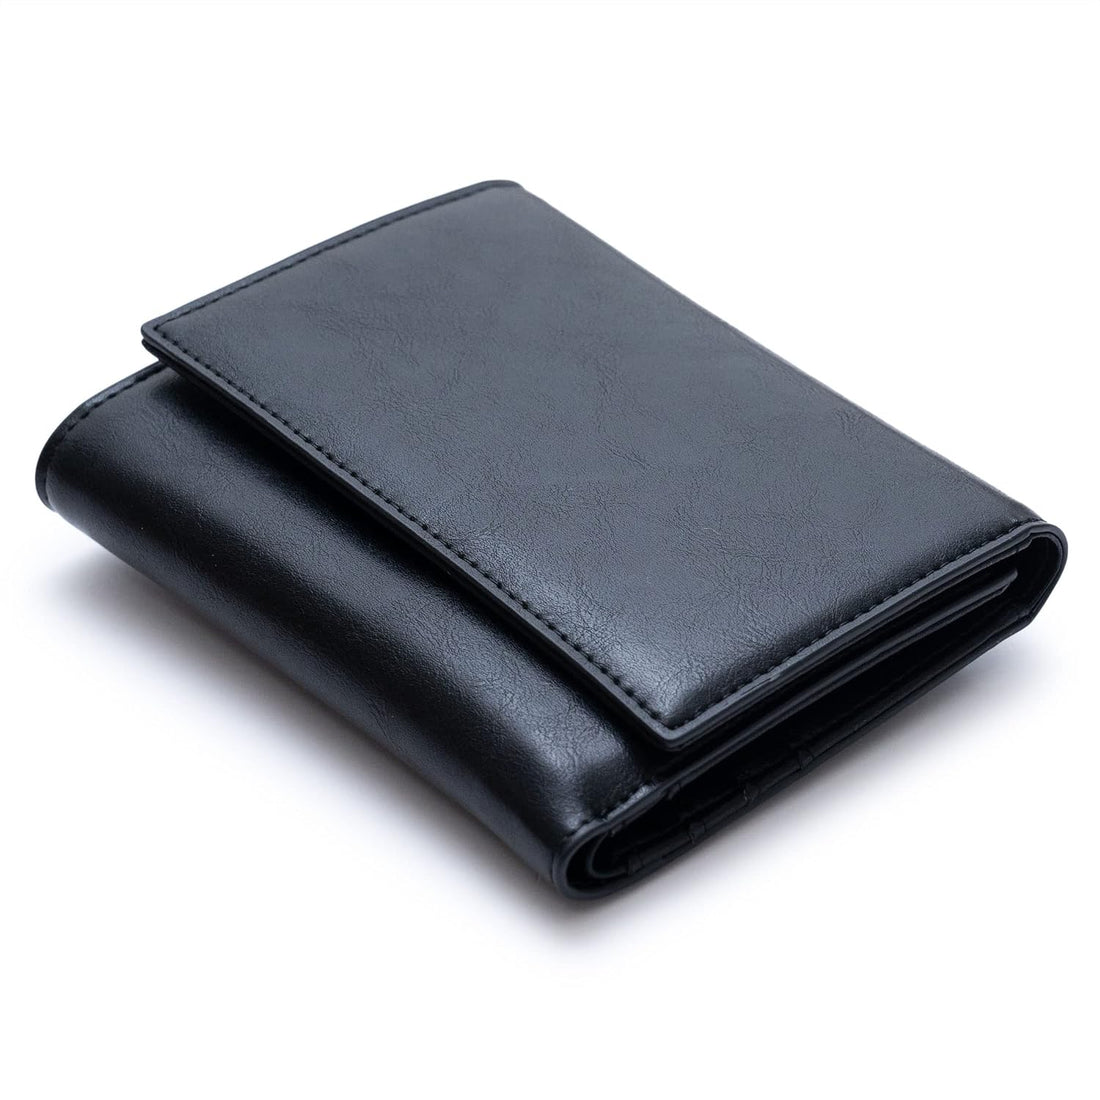 Alldaily Trifold Small RFID Blocking Wallet Slim Credit Card Wallet with with Zipper Pocket, Black